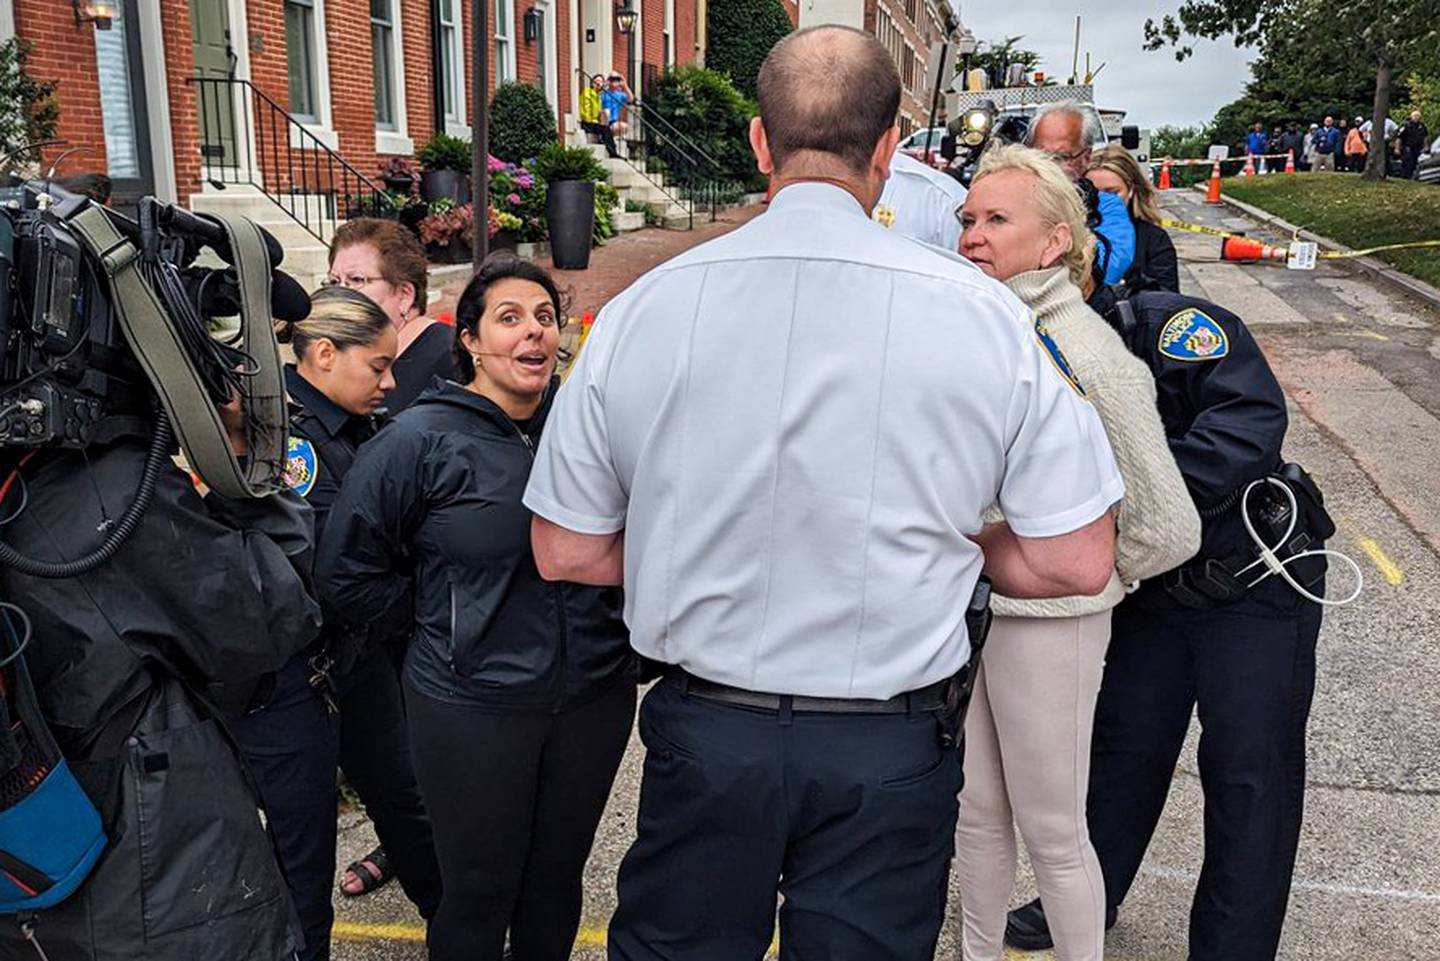 Claudia Towles, just left of center, is arrested by a Baltimore Police officer during a protest on Warren Avenue next to Federal Hill on Thursday, June 22.